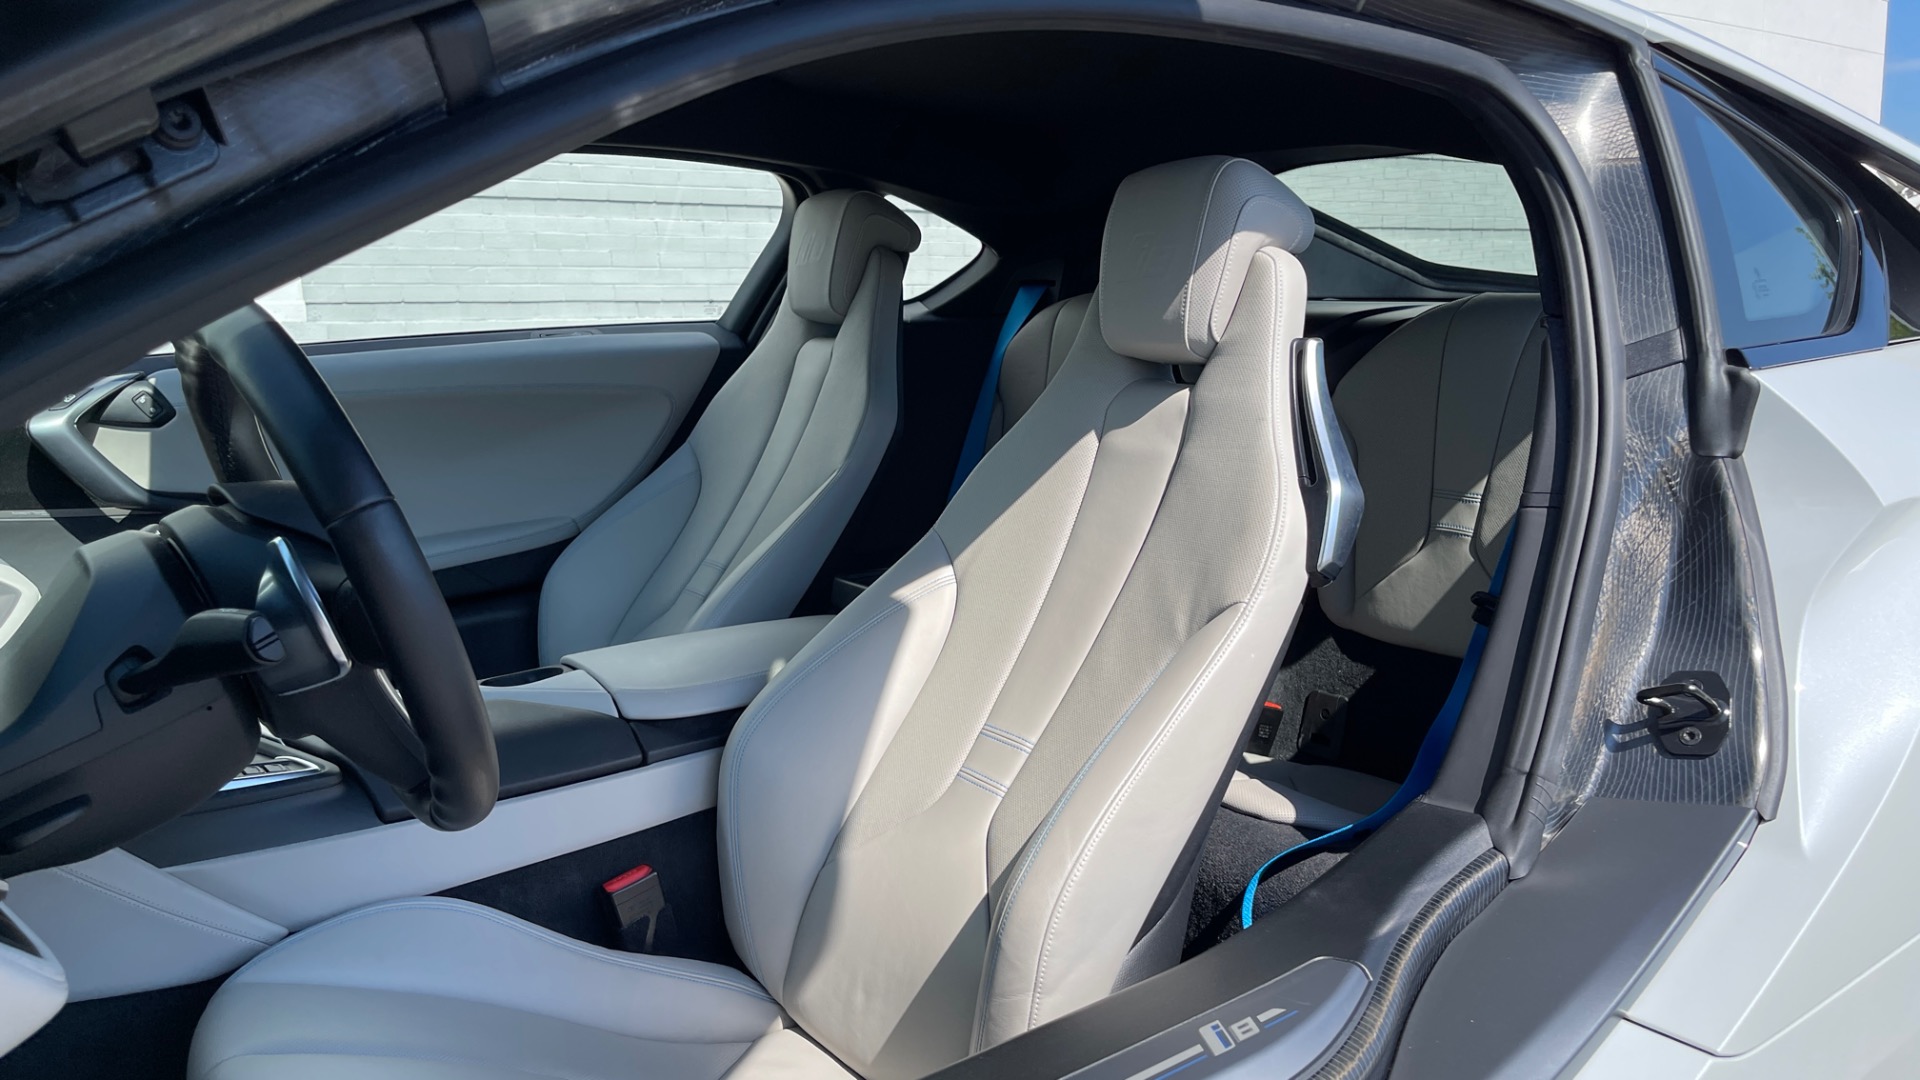 Used 2014 BMW i8 PURE IMPULSE WORLD / BLUE SEATBELTS / PERFORATED LEATHER / LED HEADLIGHTS for sale $75,999 at Formula Imports in Charlotte NC 28227 11